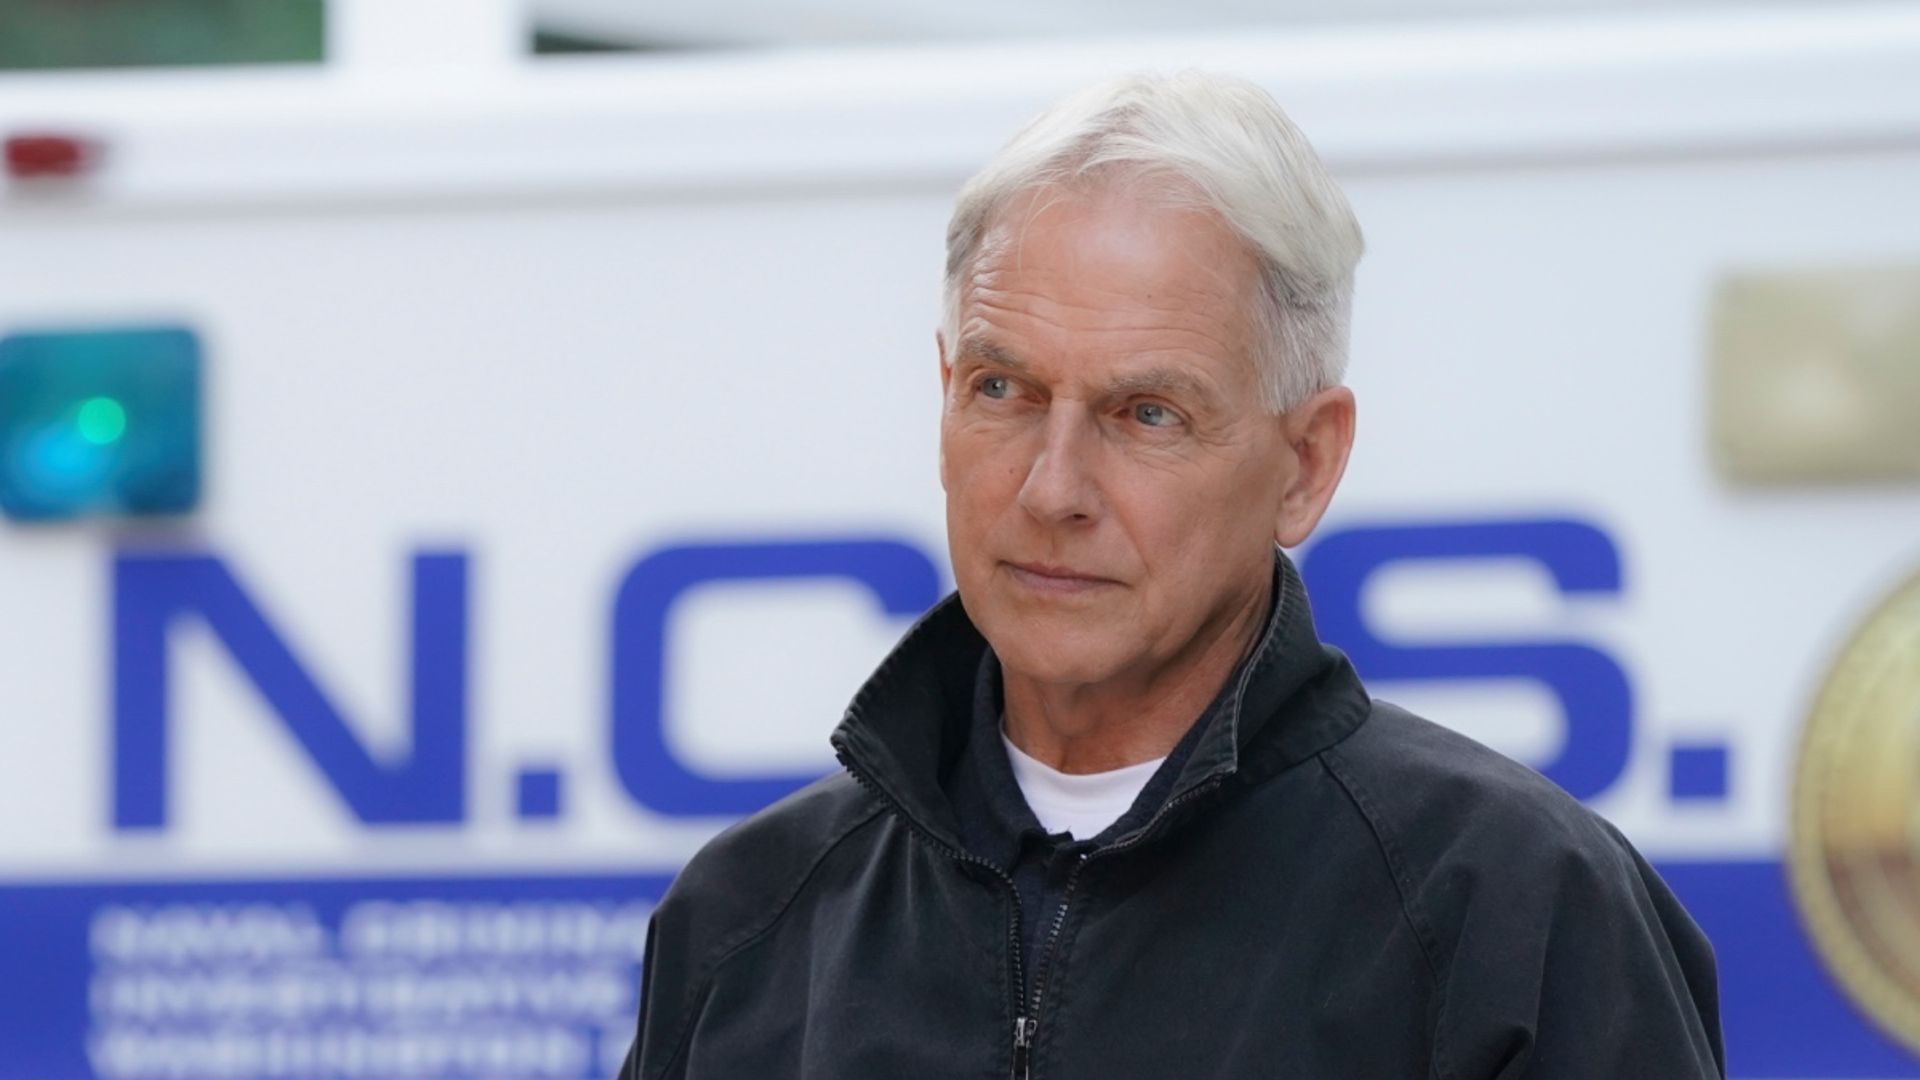 NCIS alludes to Mark Harmon’s departure and possible return in latest episode